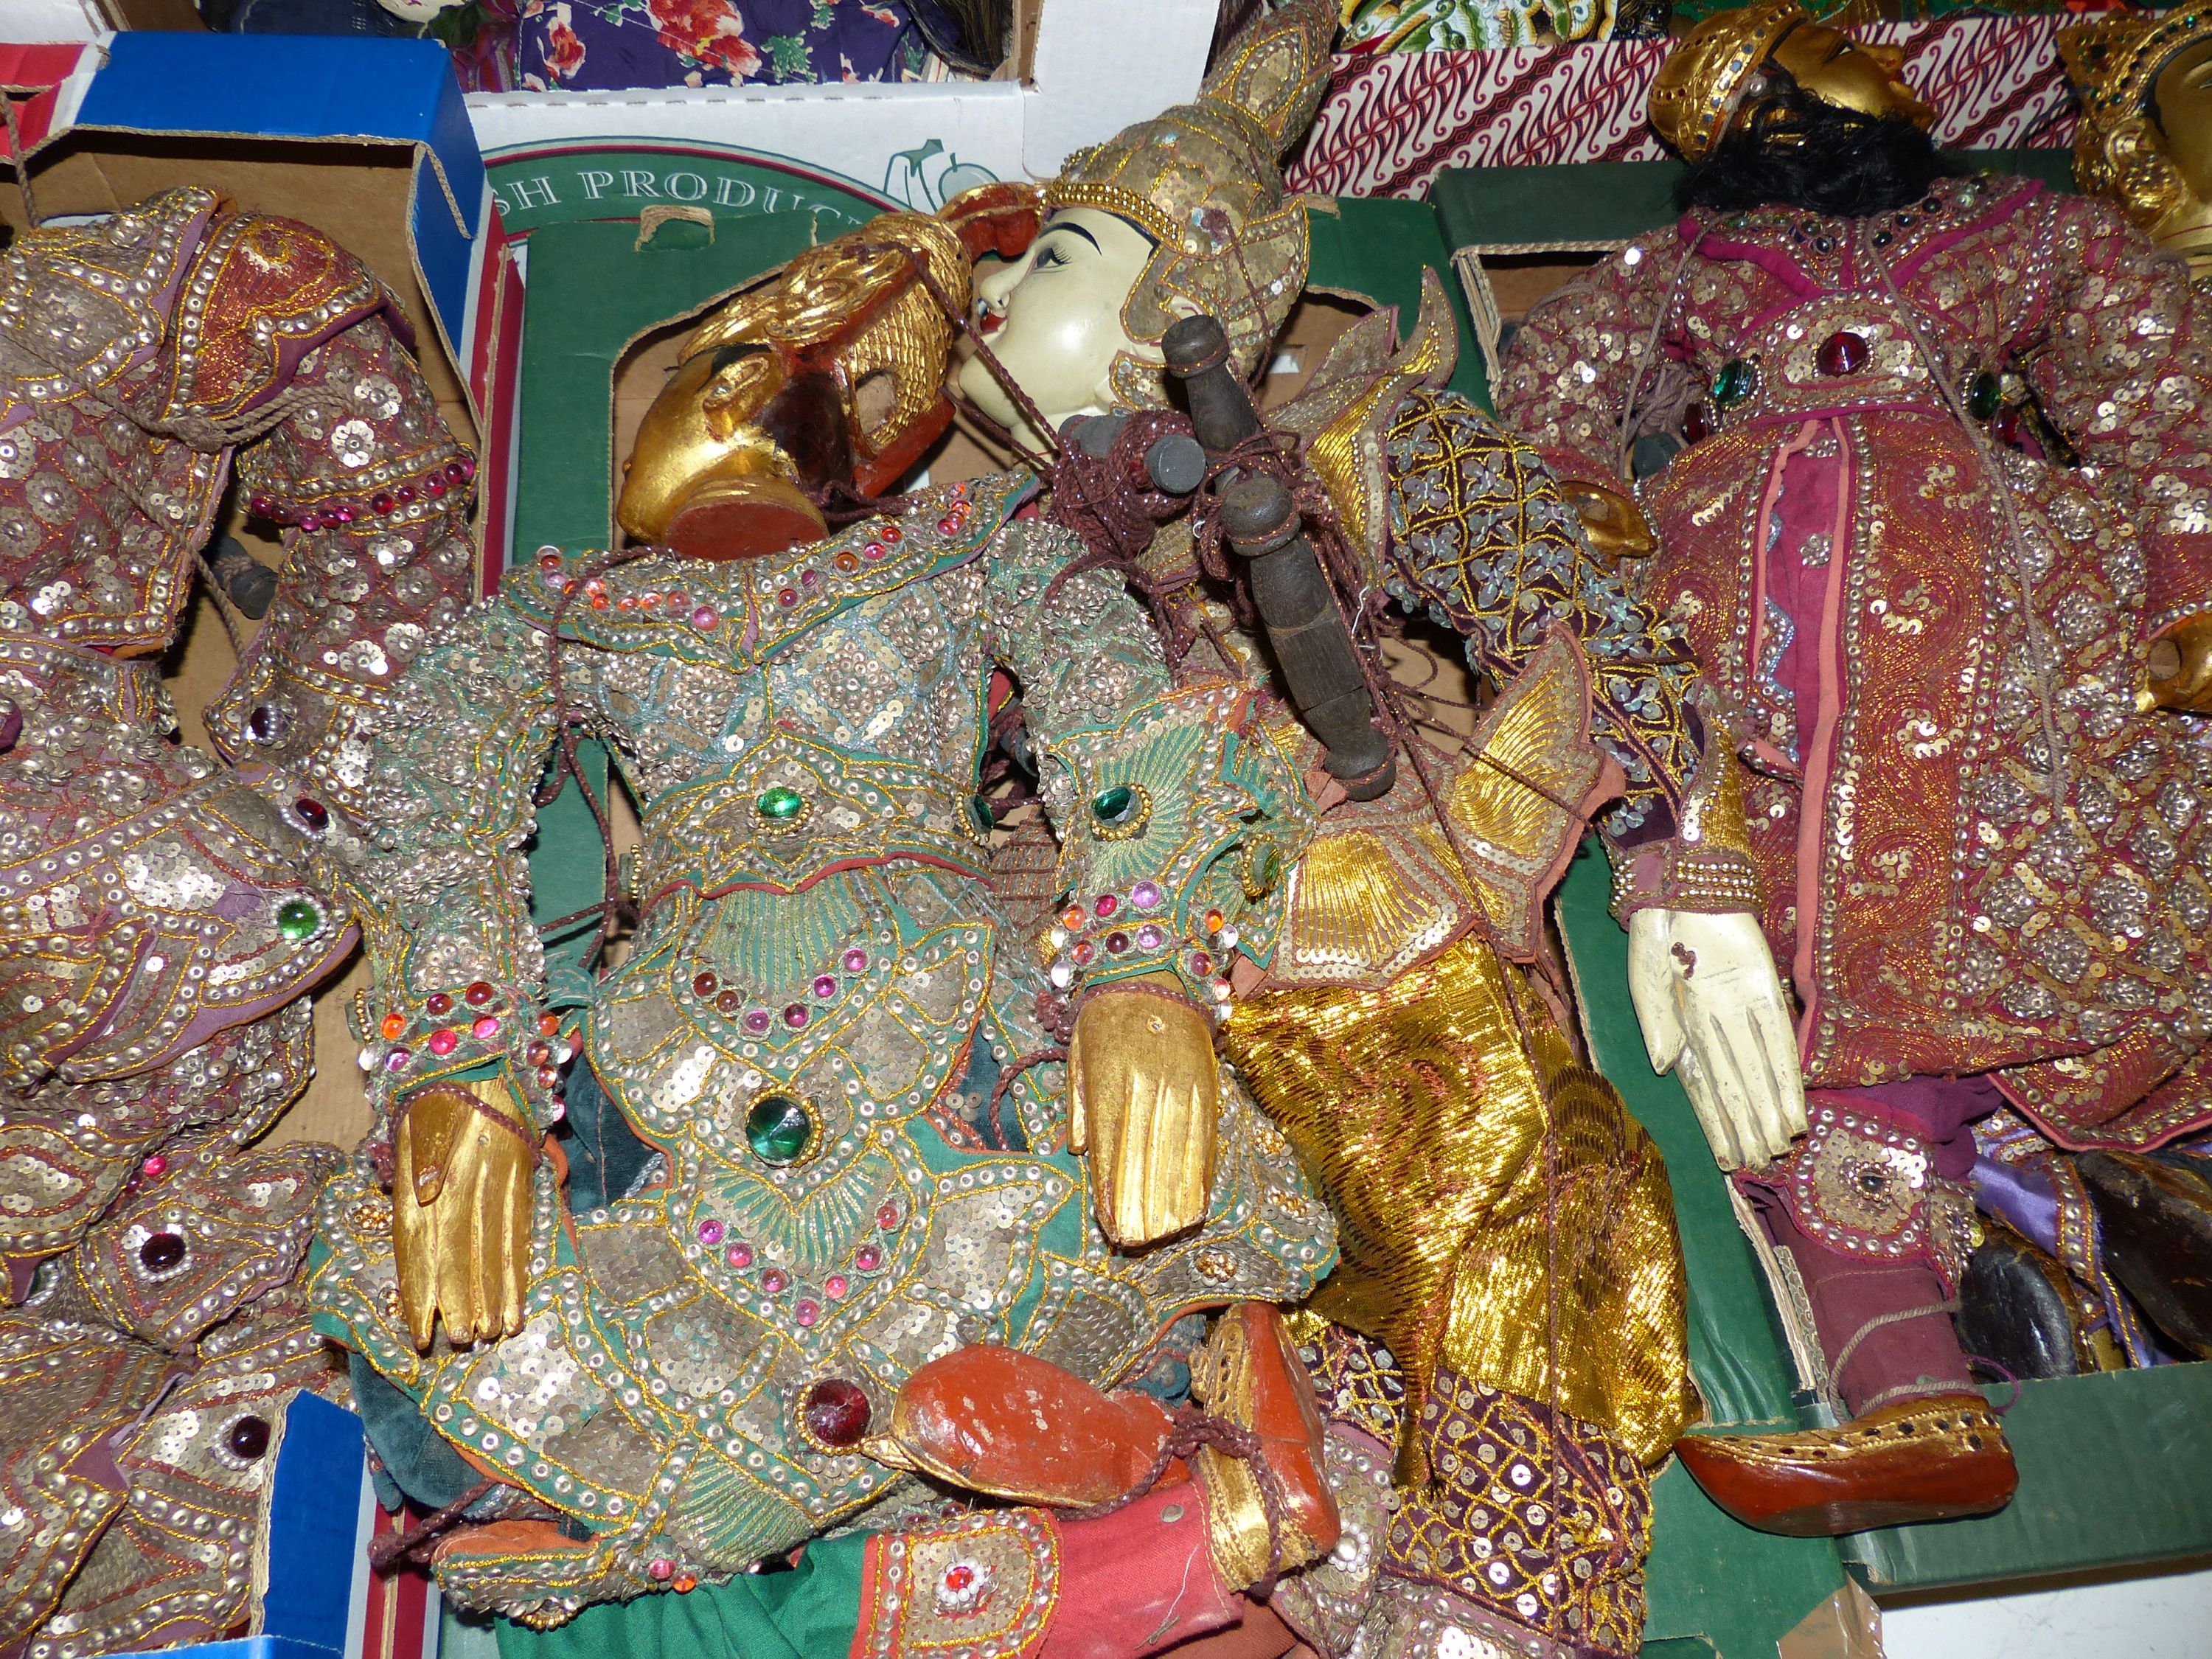 A quantity of Indonesian marionettes